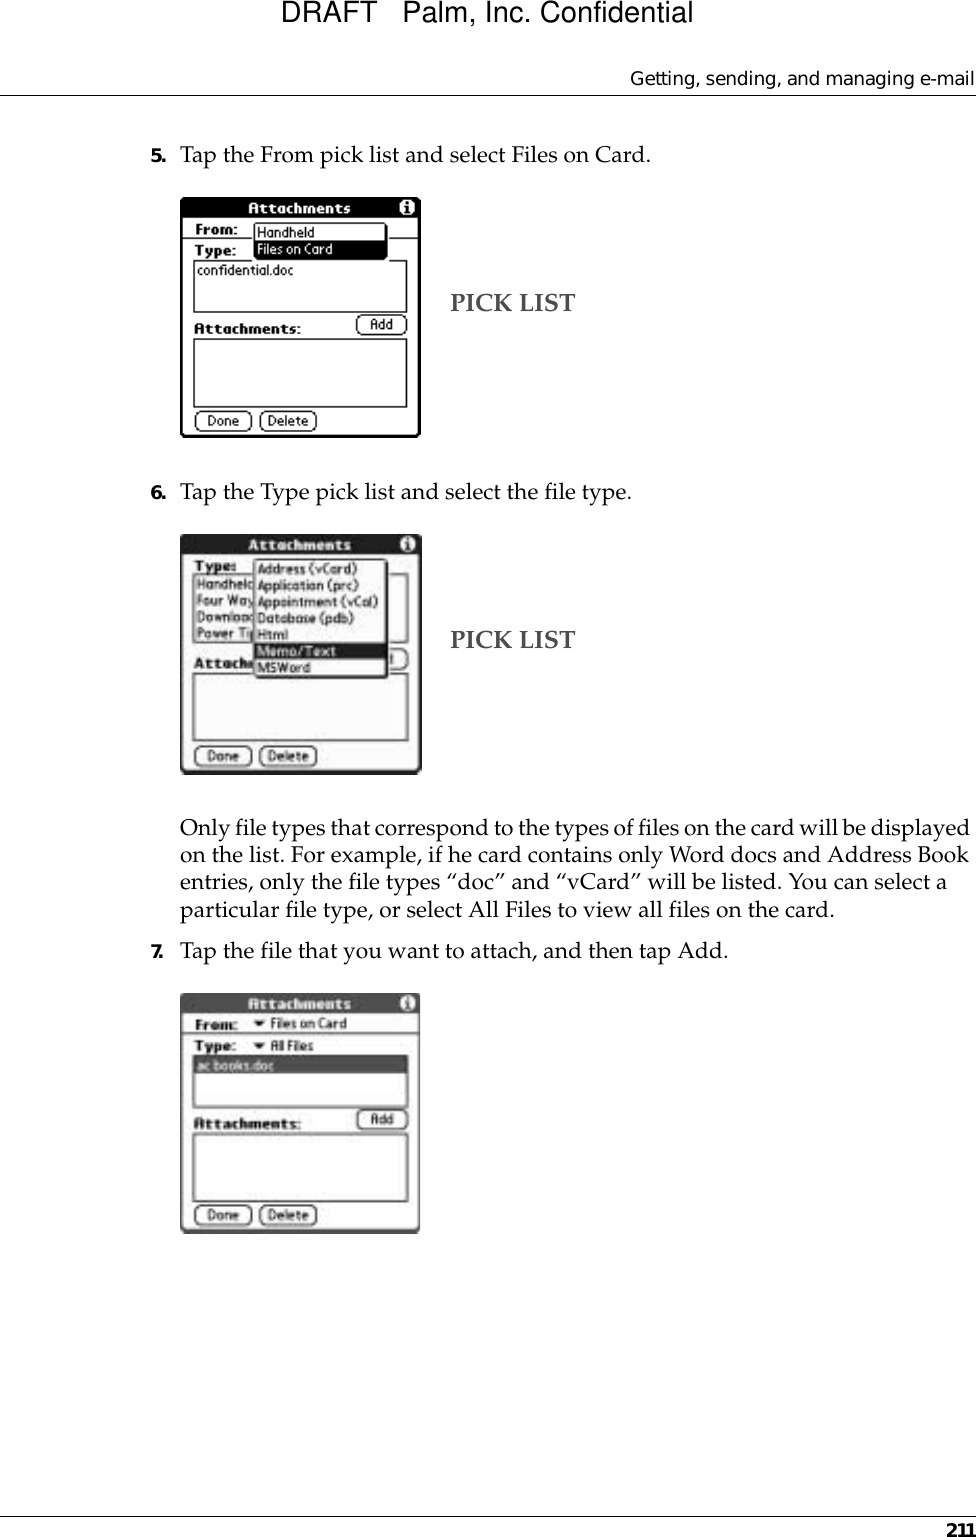 Getting, sending, and managing e-mail2115. Tap the From pick list and select Files on Card.6. Tap the Type pick list and select the file type.Only file types that correspond to the types of files on the card will be displayed on the list. For example, if he card contains only Word docs and Address Book entries, only the file types “doc” and “vCard” will be listed. You can select a particular file type, or select All Files to view all files on the card. 7. Tap the file that you want to attach, and then tap Add.PICK LISTPICK LISTDRAFT   Palm, Inc. Confidential